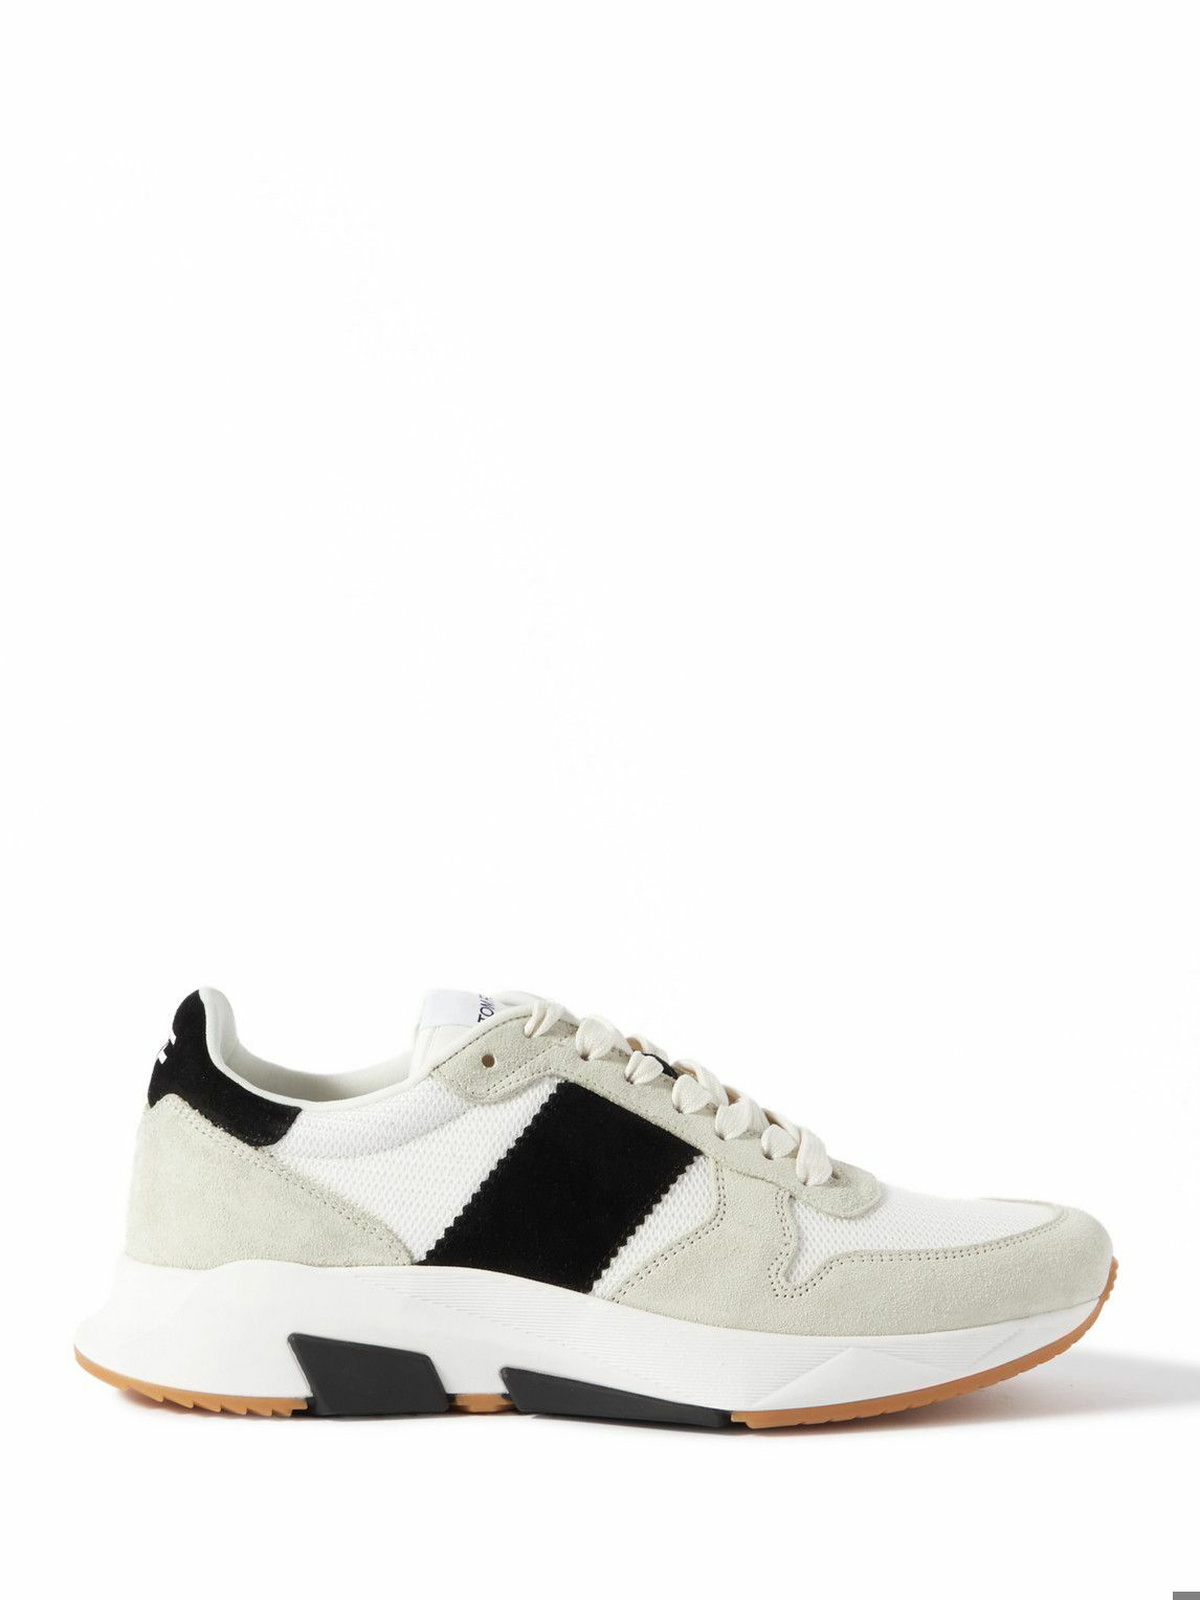 TOM FORD - Jagga Suede and Mesh Sneakers - White TOM FORD